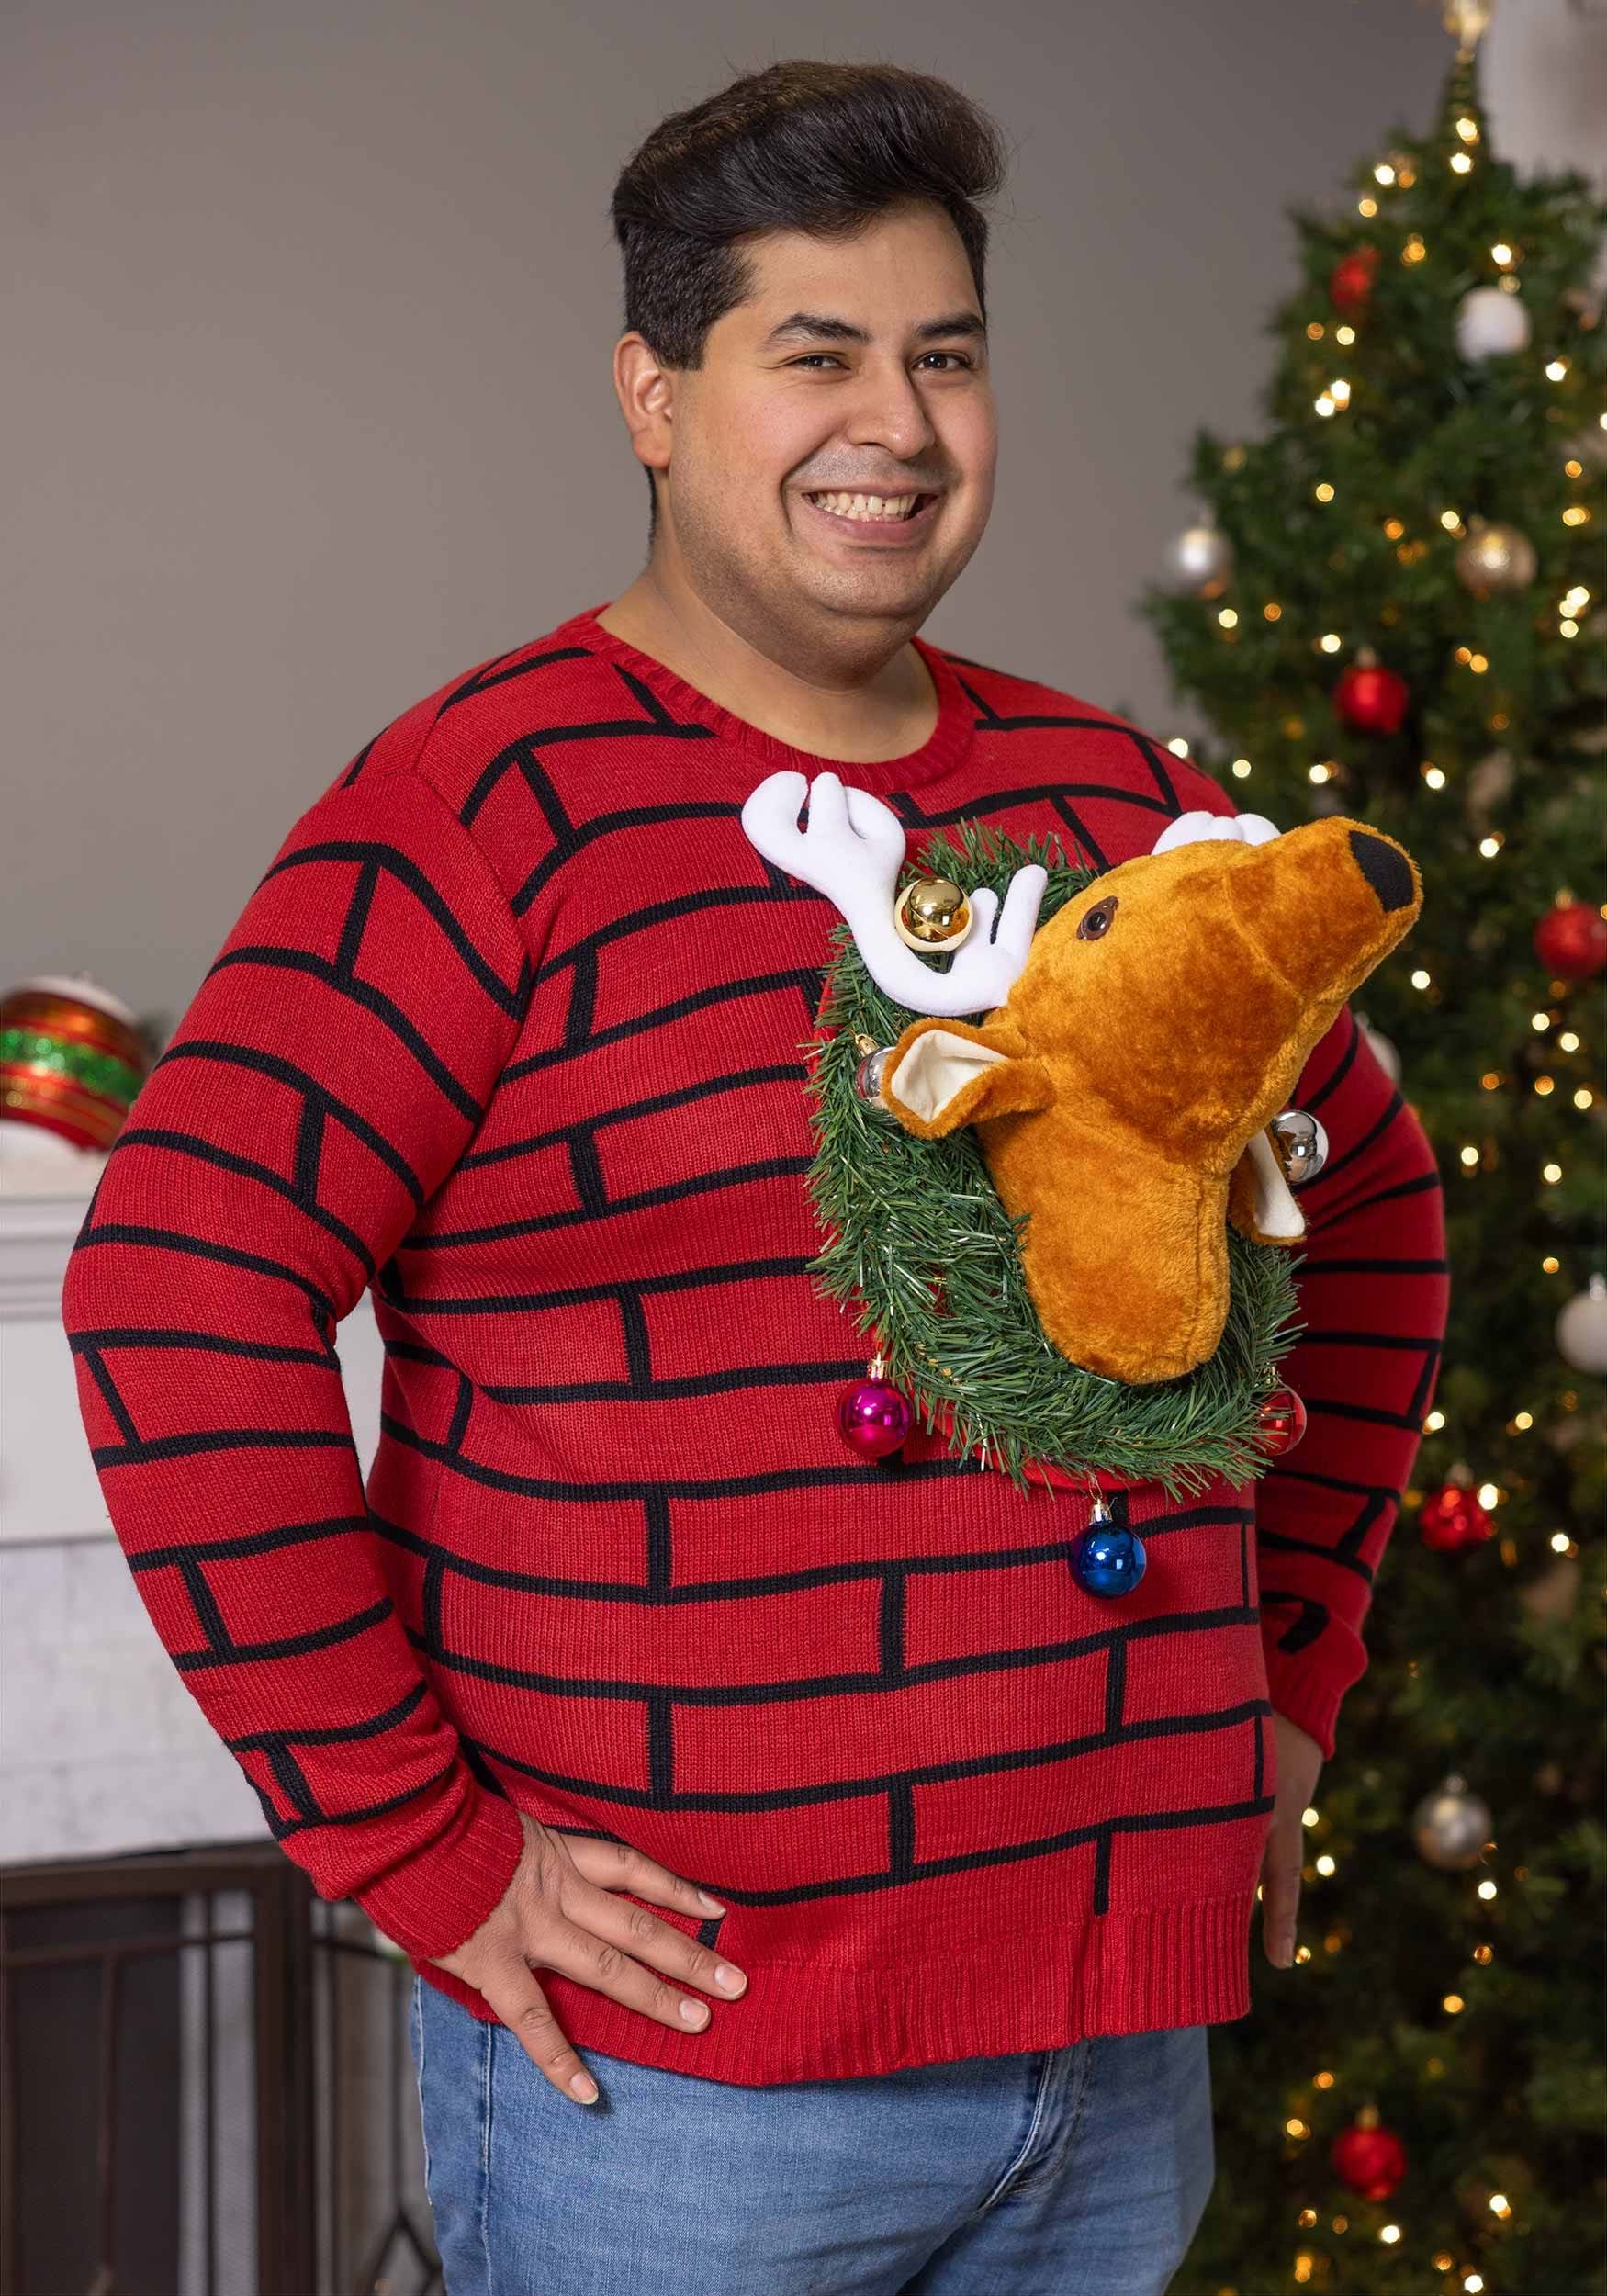 Gallery For gt; Ugly Christmas Sweaters For Men